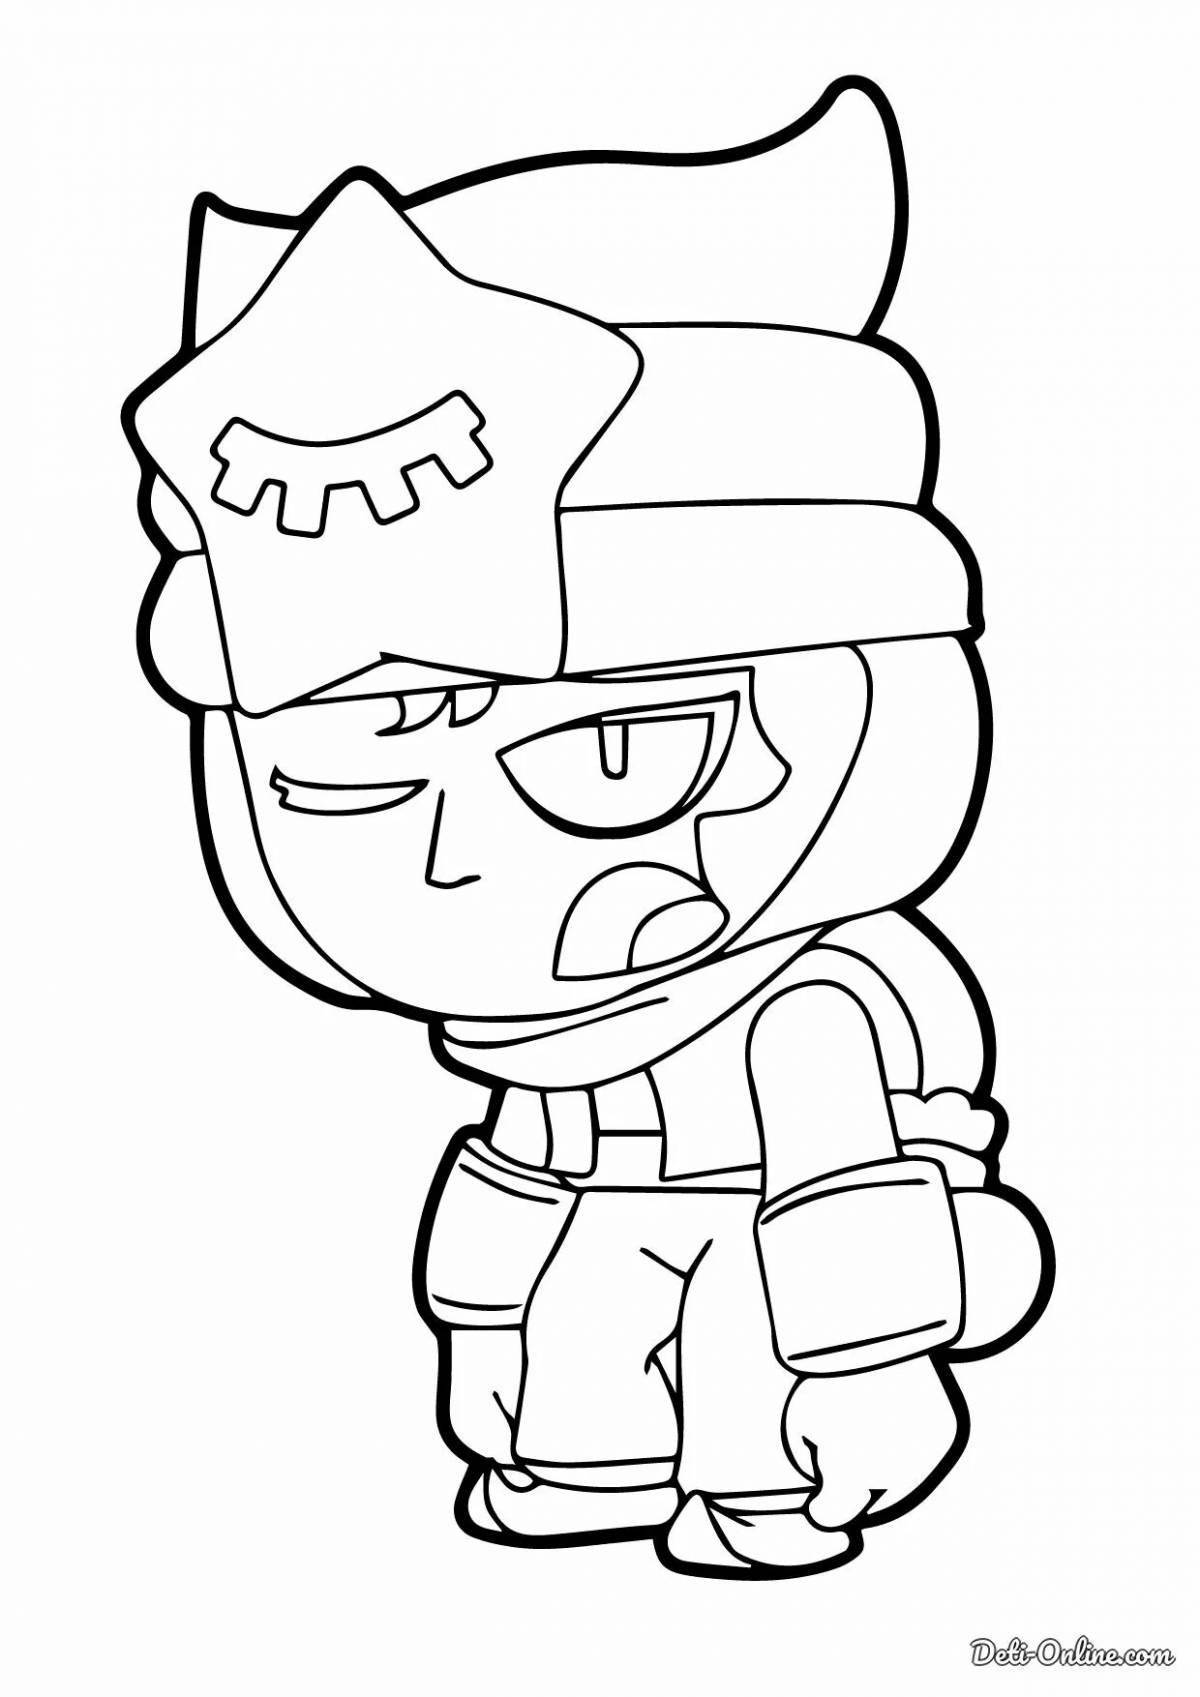 Animated dynamike coloring page